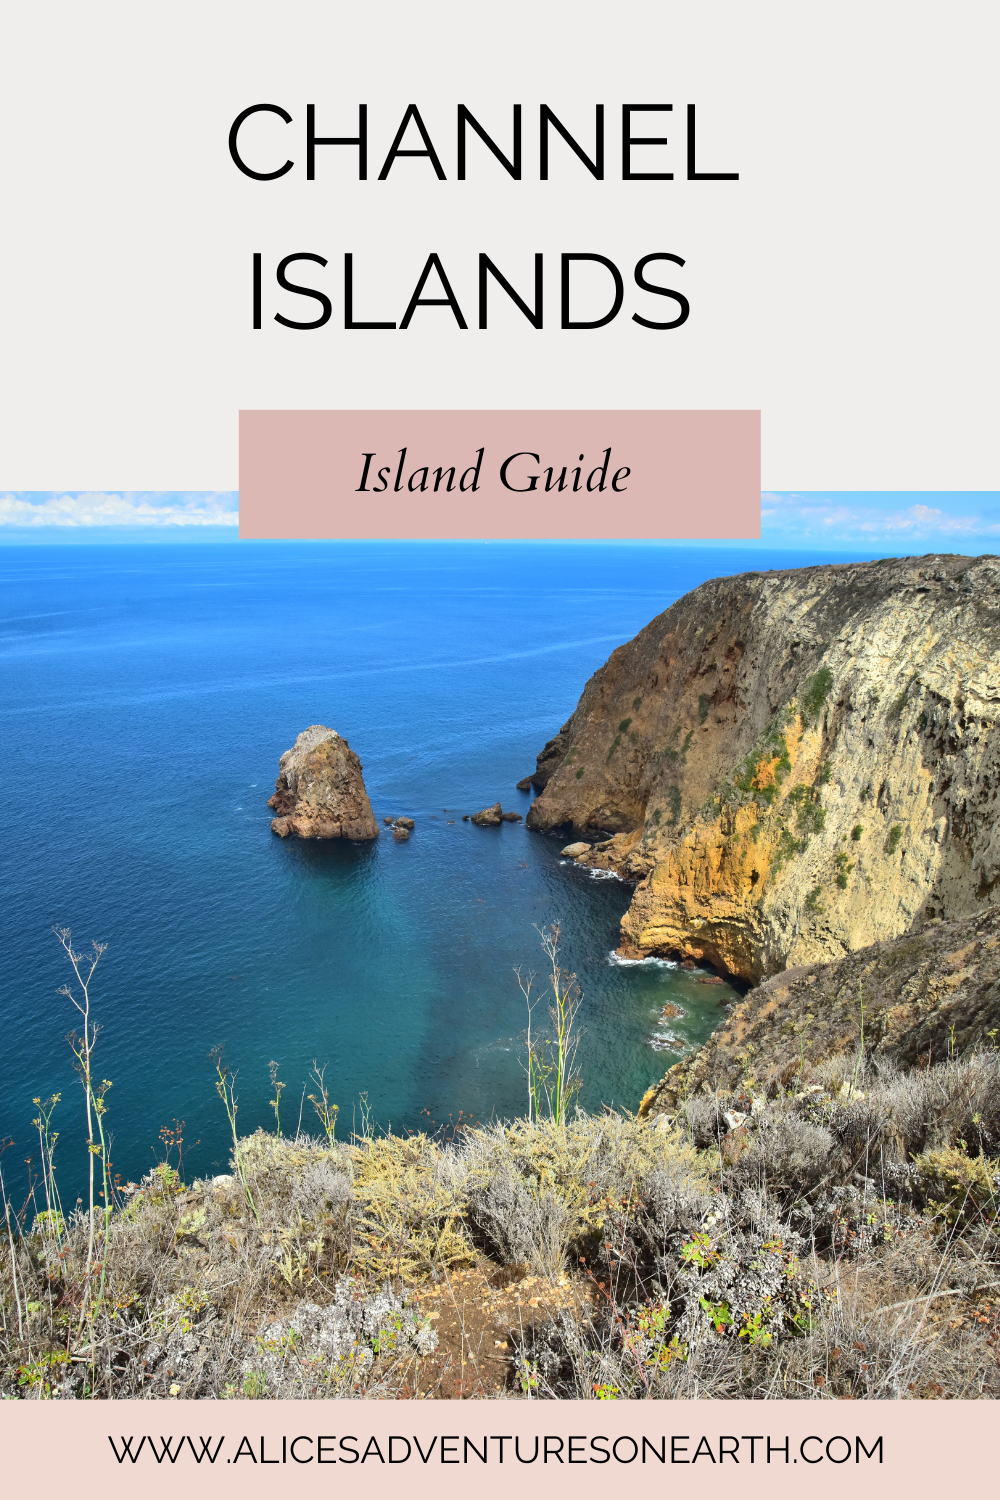 Channel islands national parks in california, island guide and breakdown  #california #nationalparks